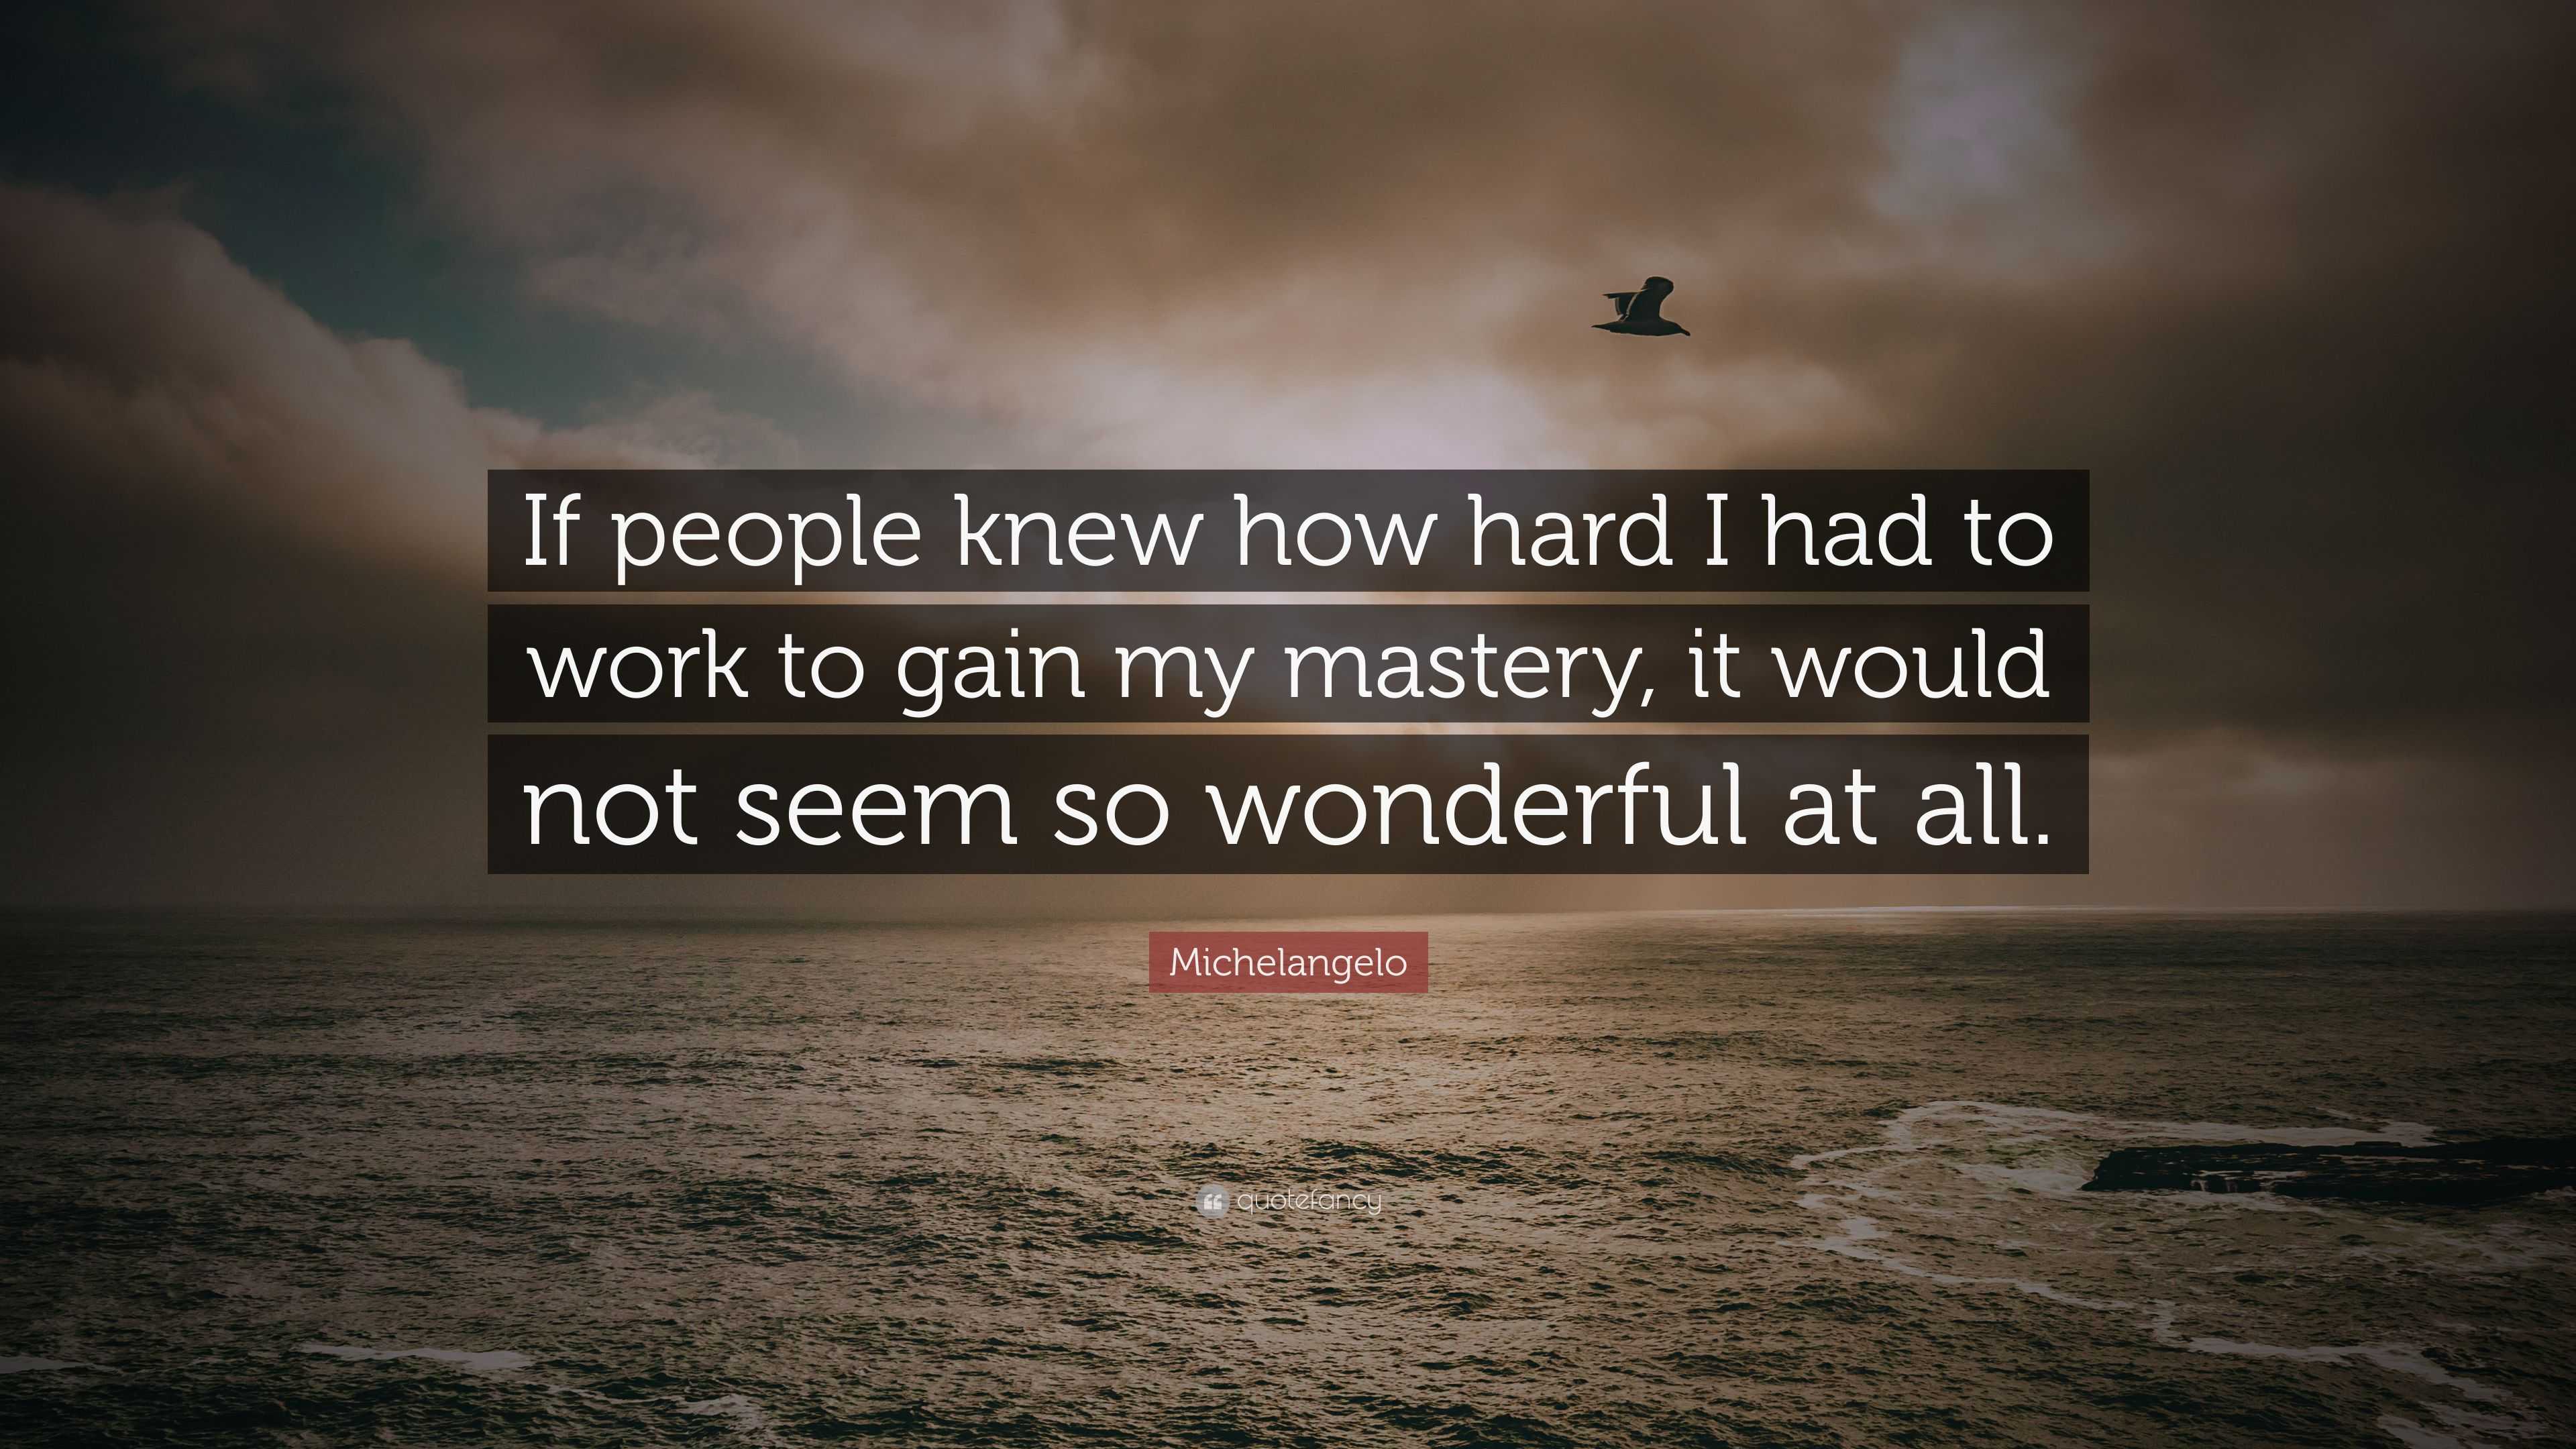 Michelangelo Quote: “If people knew how hard I had to work to gain my